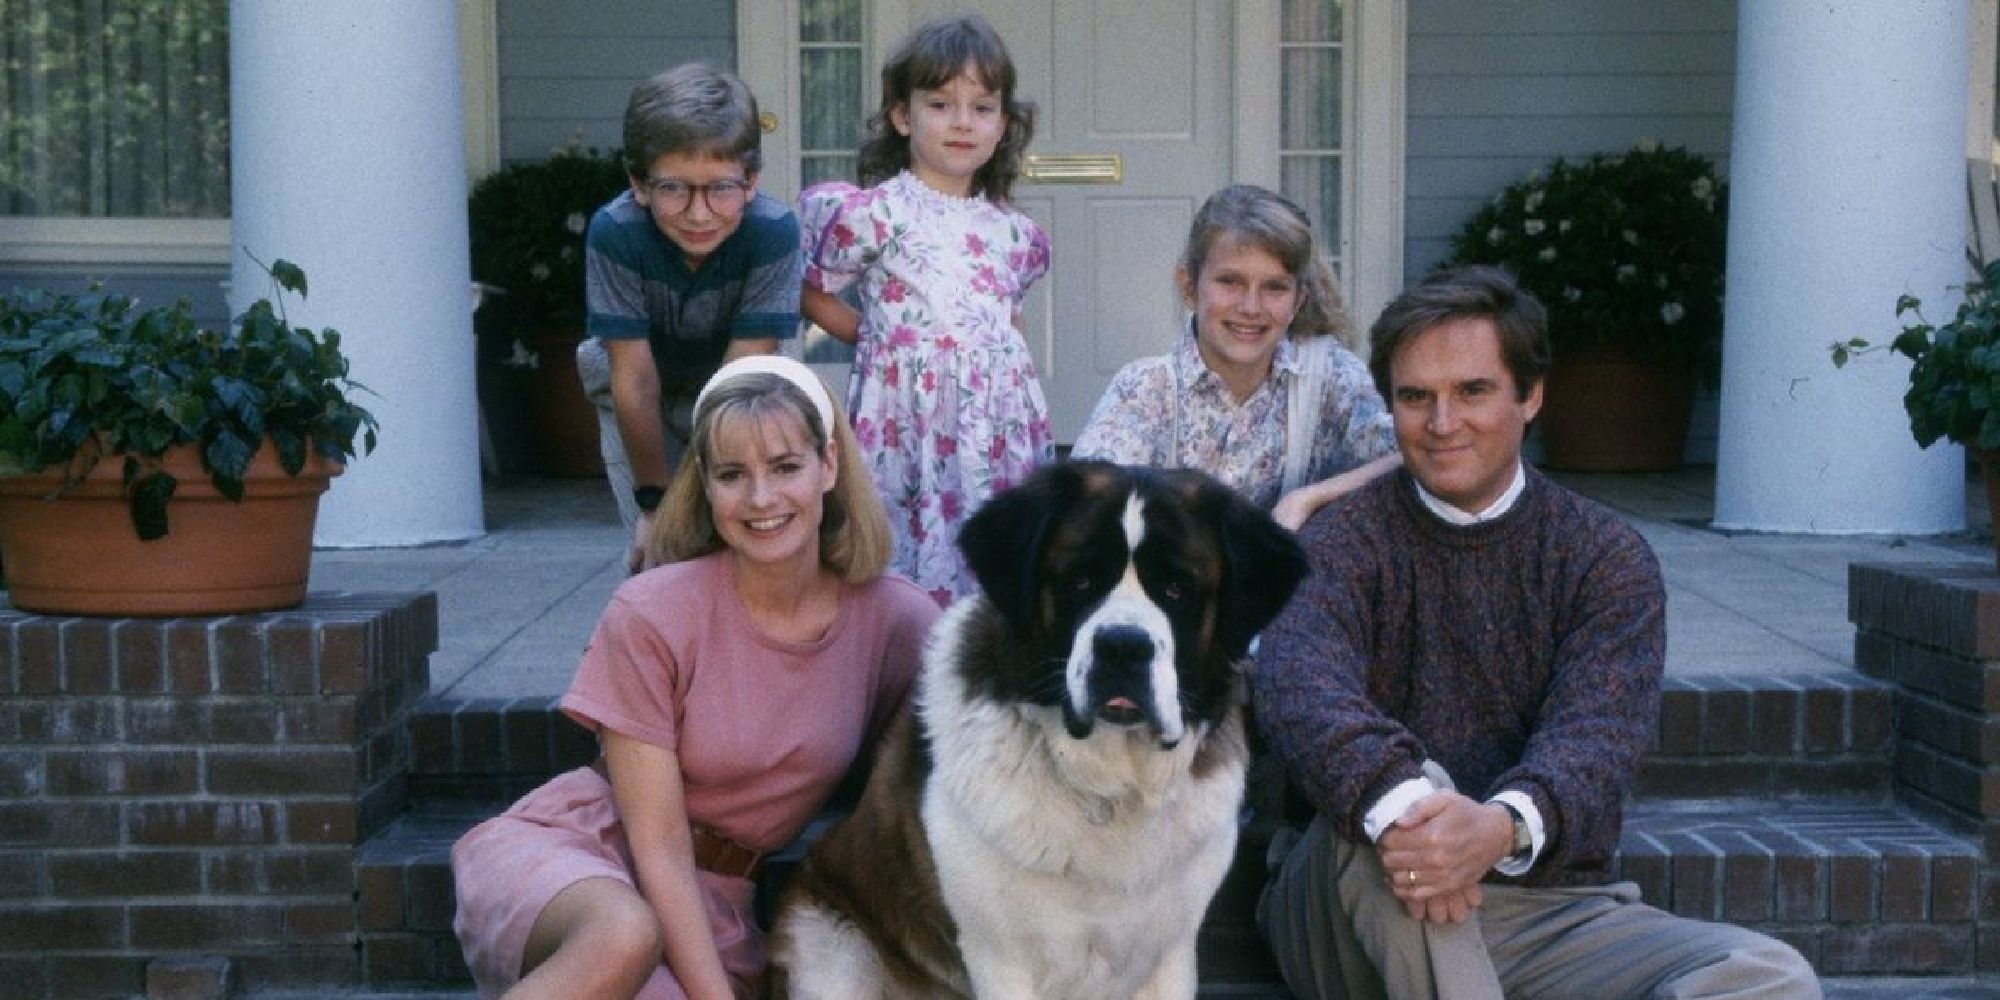 The cast of Beethoven with the Beethoven dog